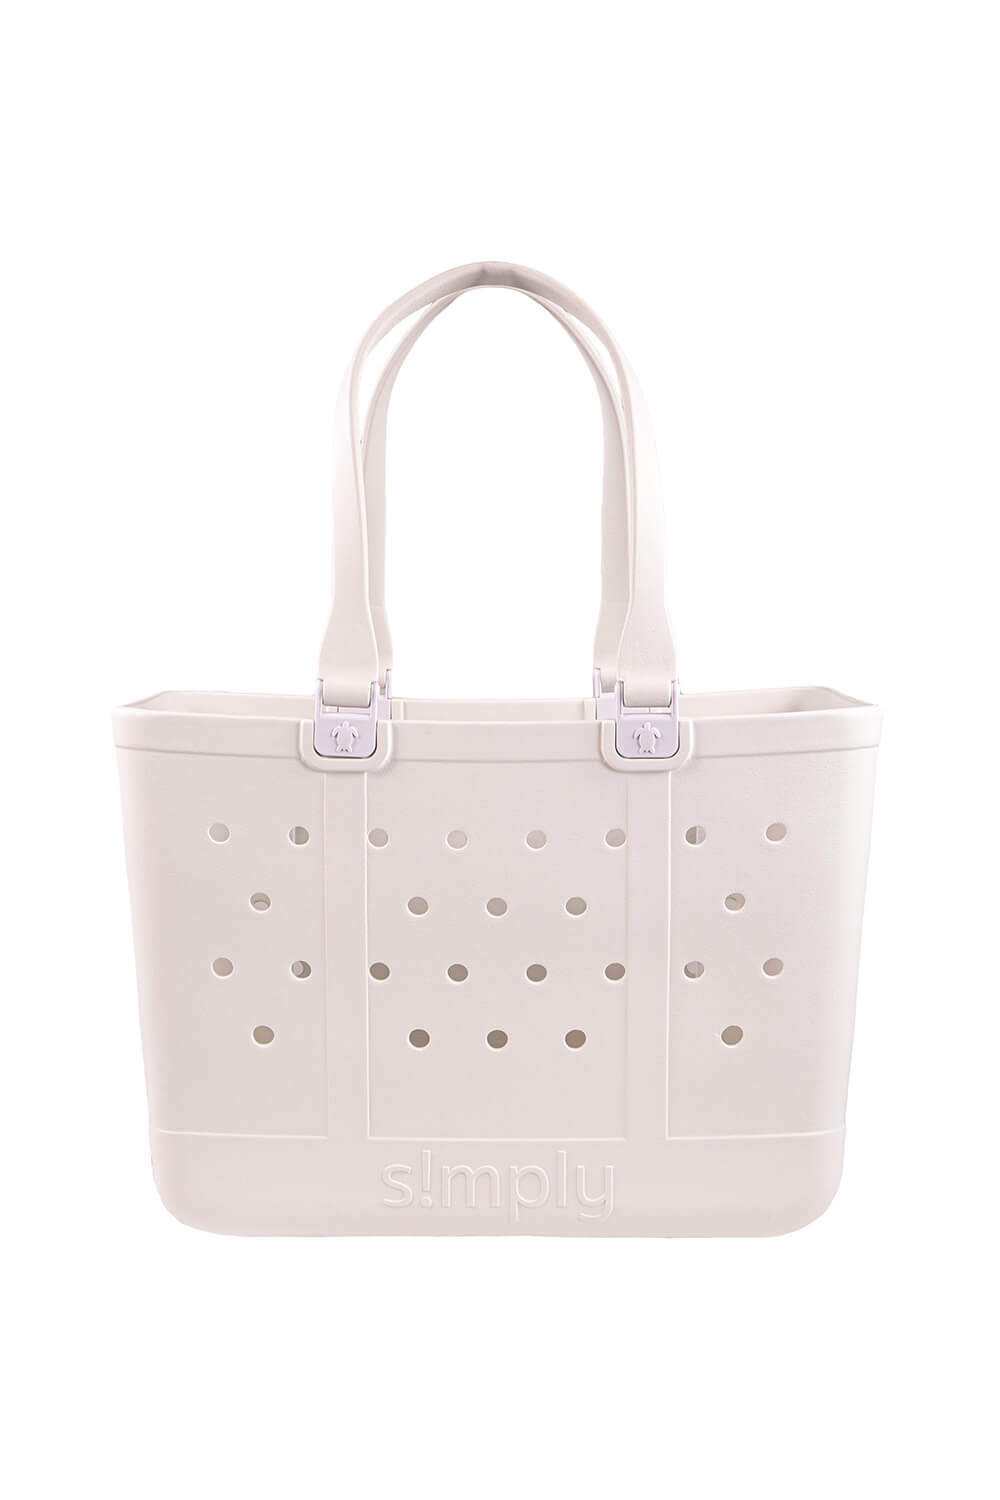 Simply Southern Large Tote Allium